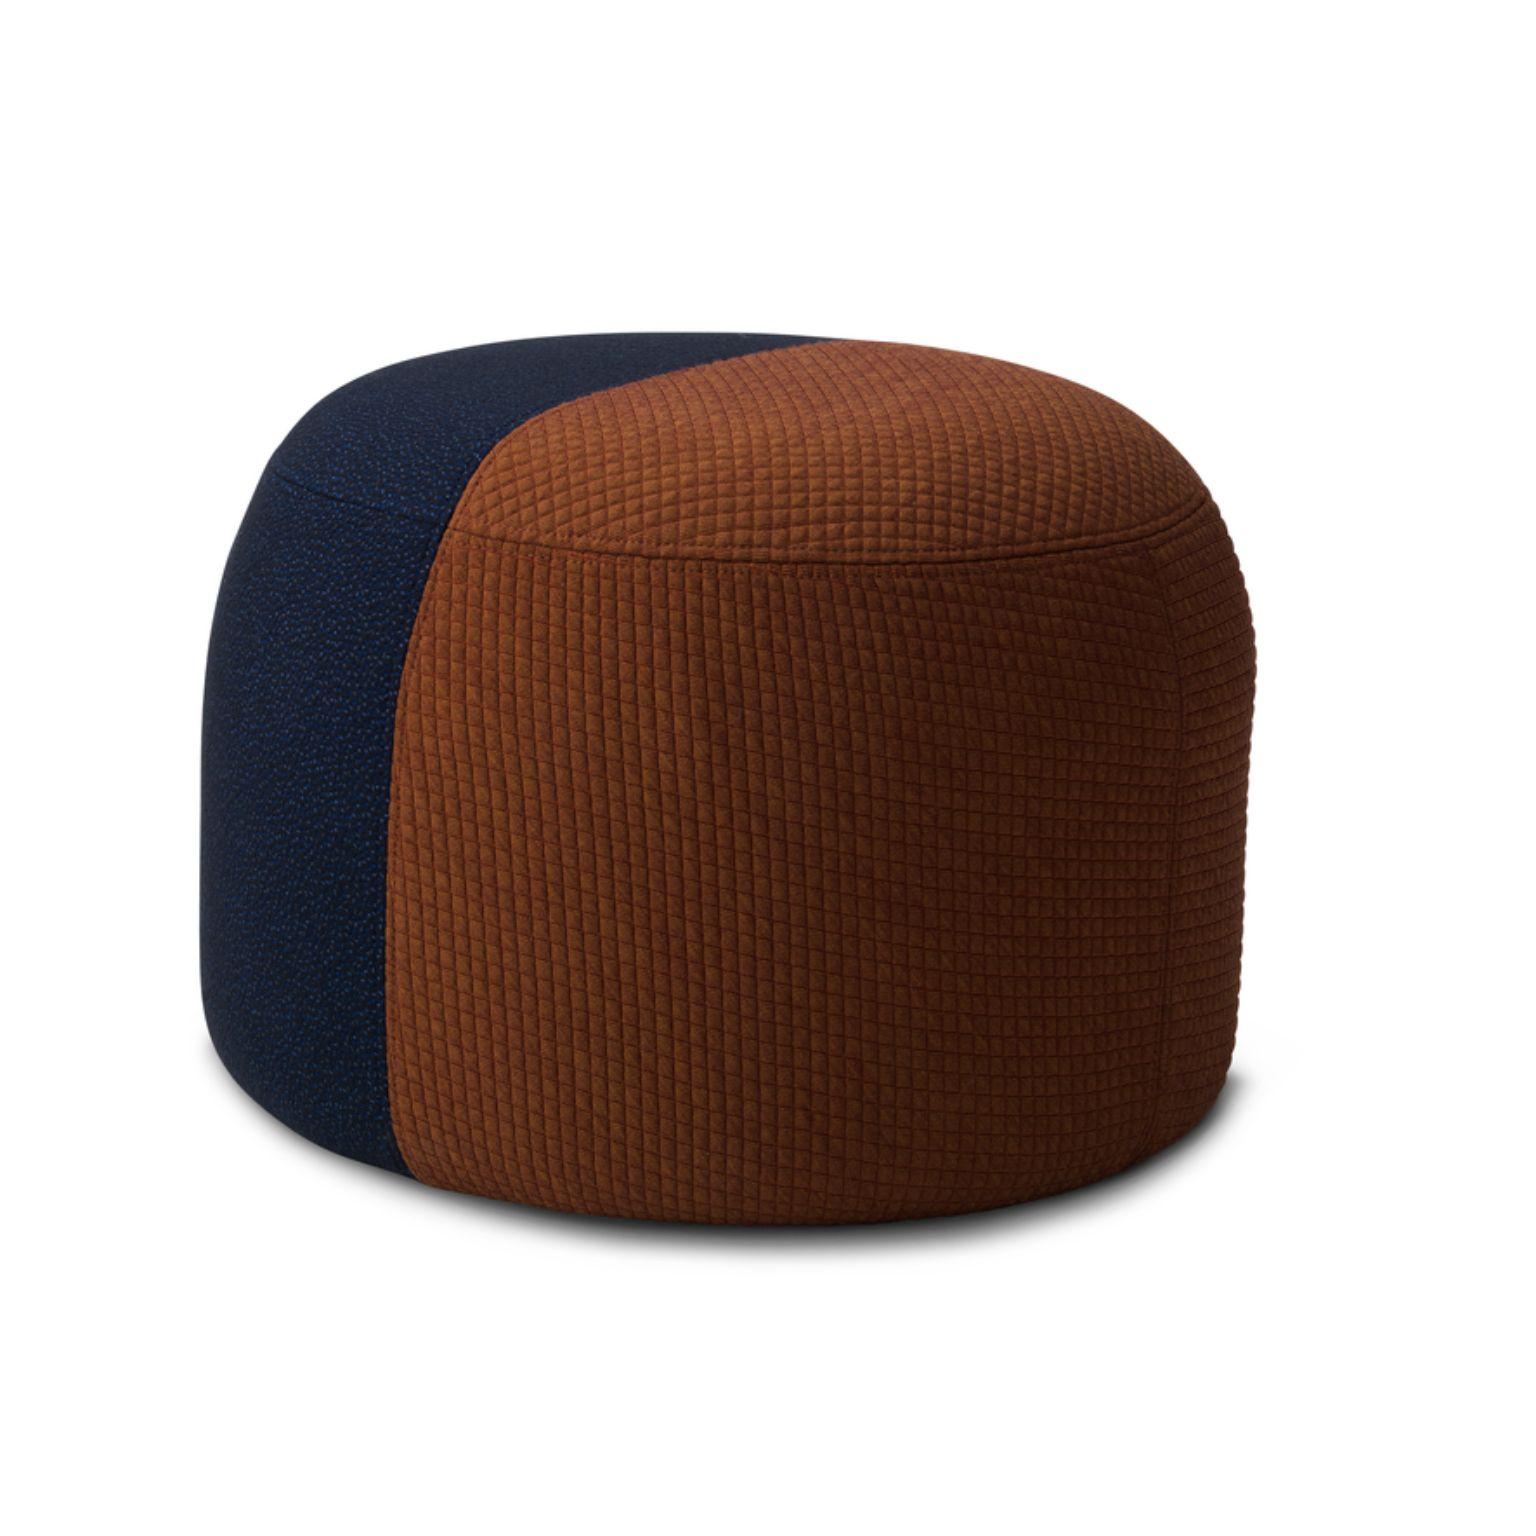 Dainty Pouf Mosaic Sprinkles rusty midnight blue by Warm Nordic
Dimensions: D 55 x H 39 cm
Material: Textile upholstery, wooden frame, foam.
Weight: 9.5 kg
Also available in different colours and finishes.

Sophisticated, two-coloured pouf